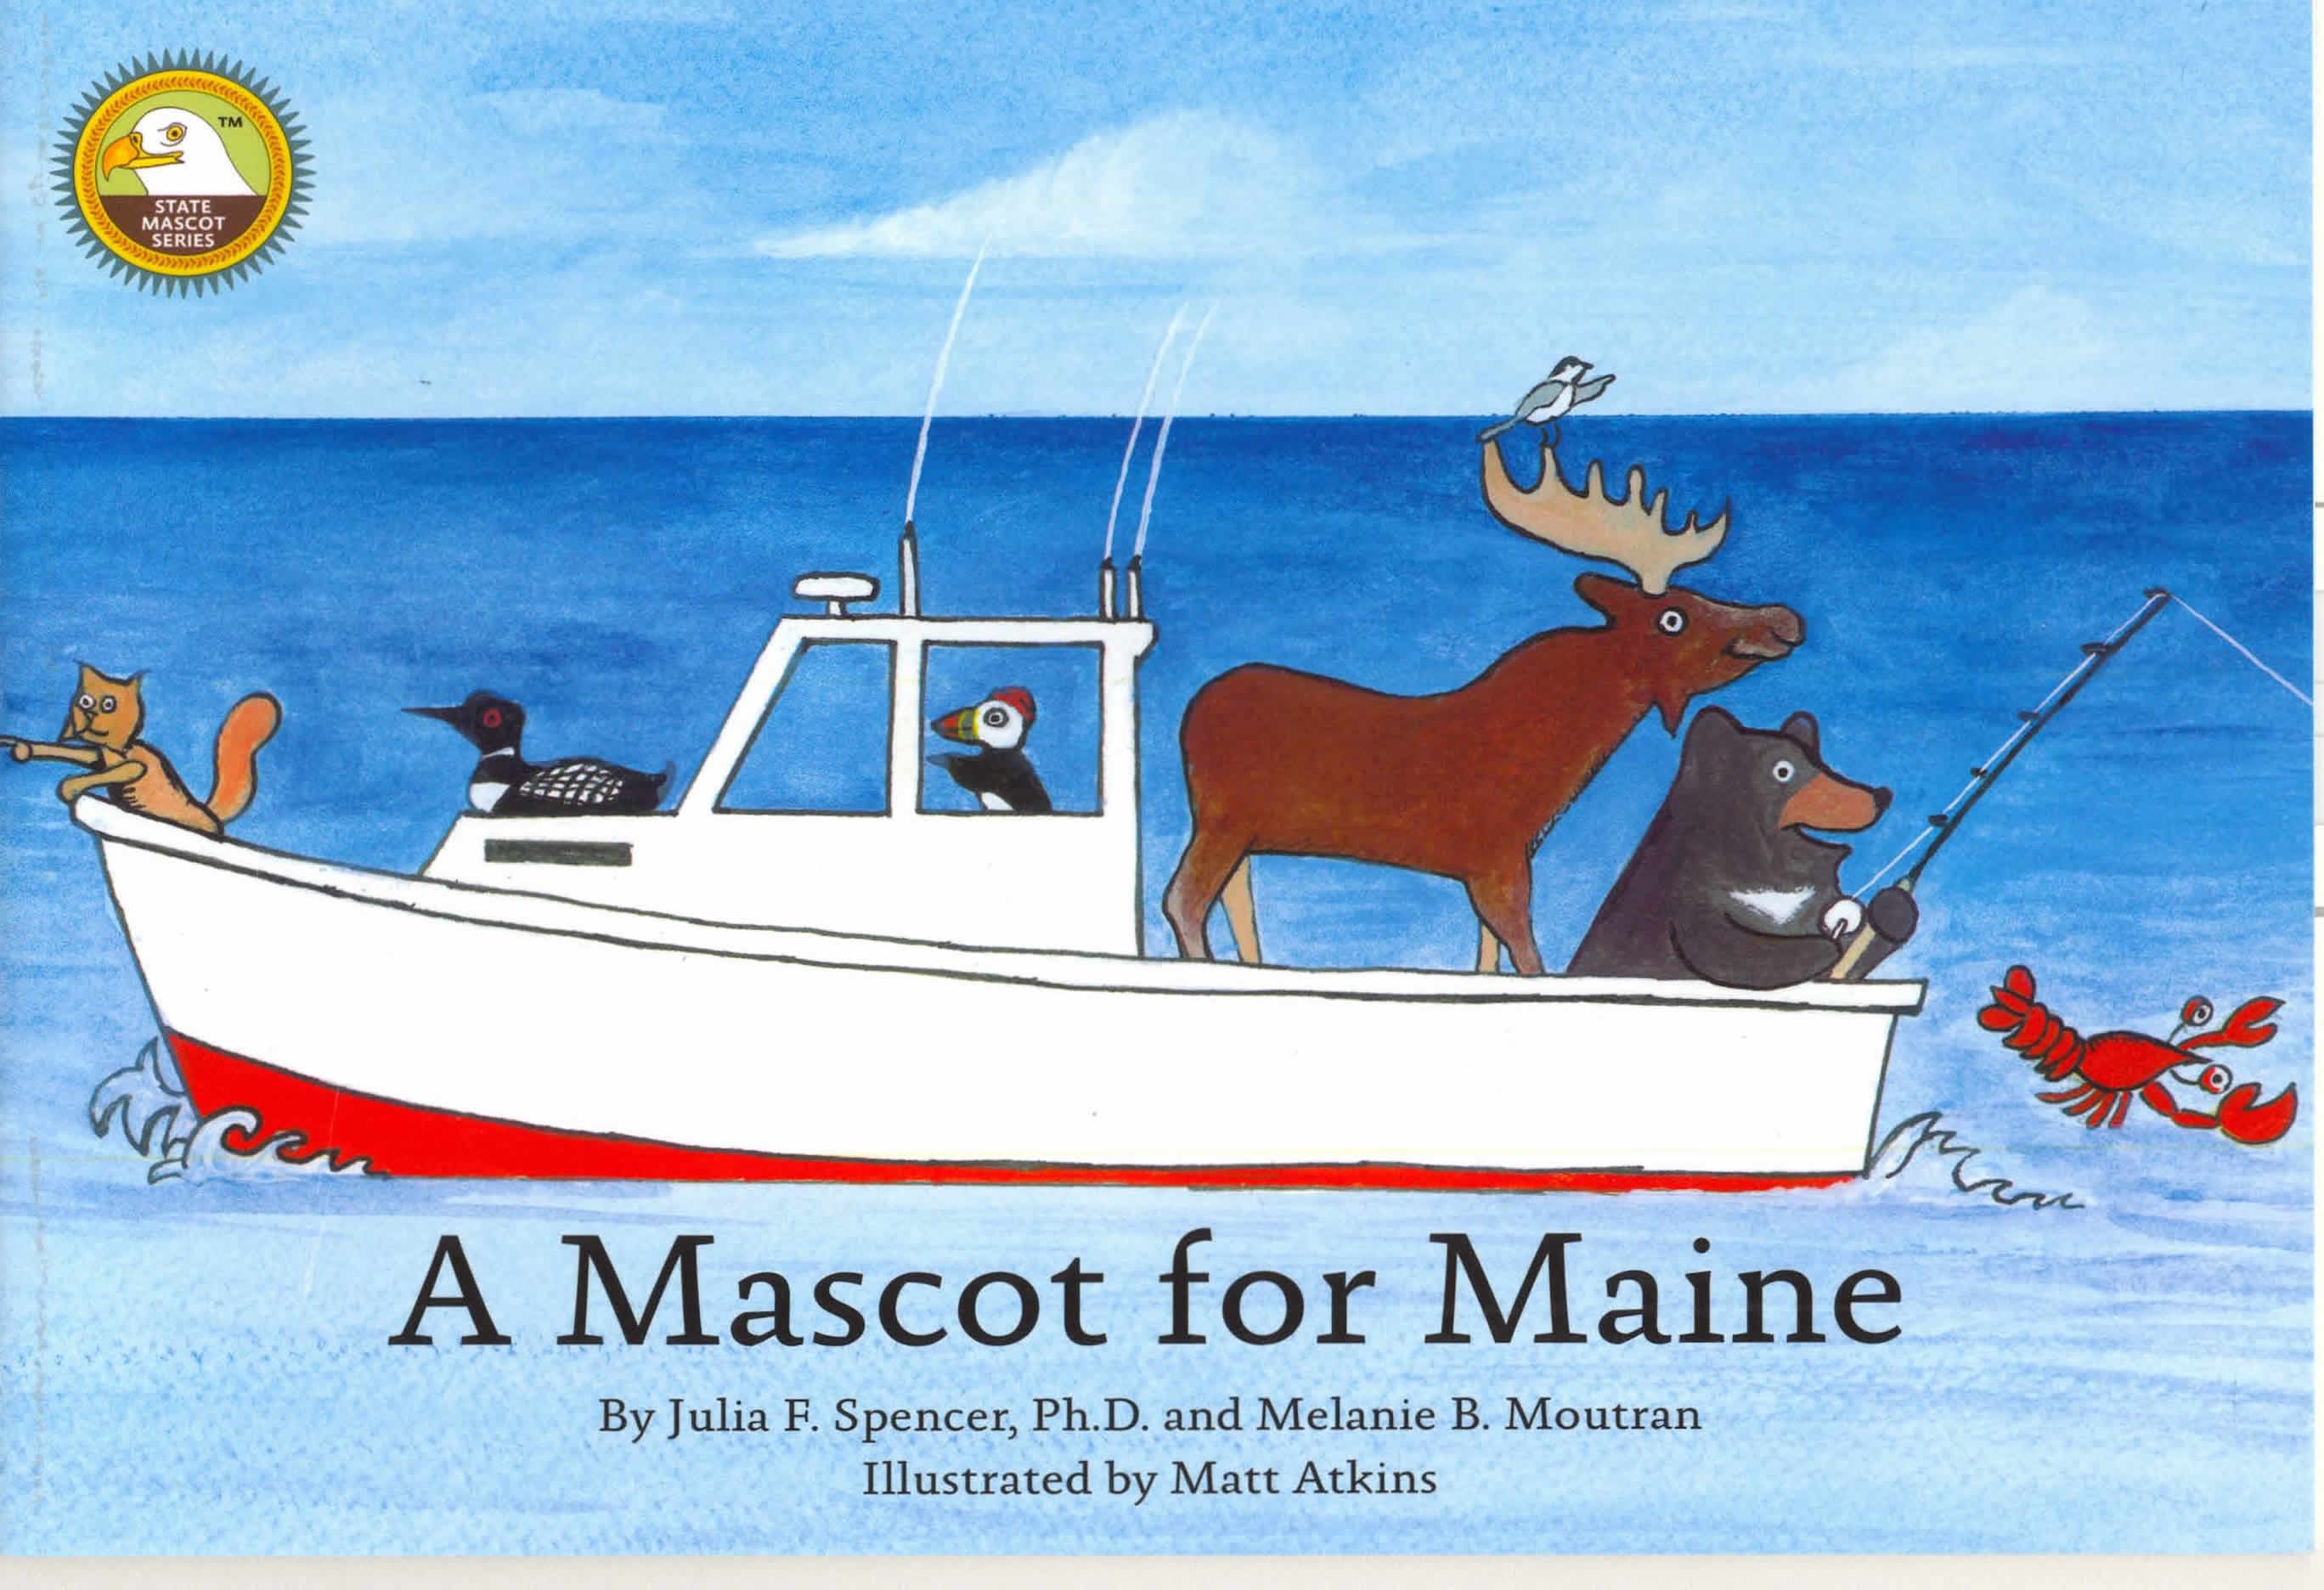 Image of the book cover A Mascot for Maine